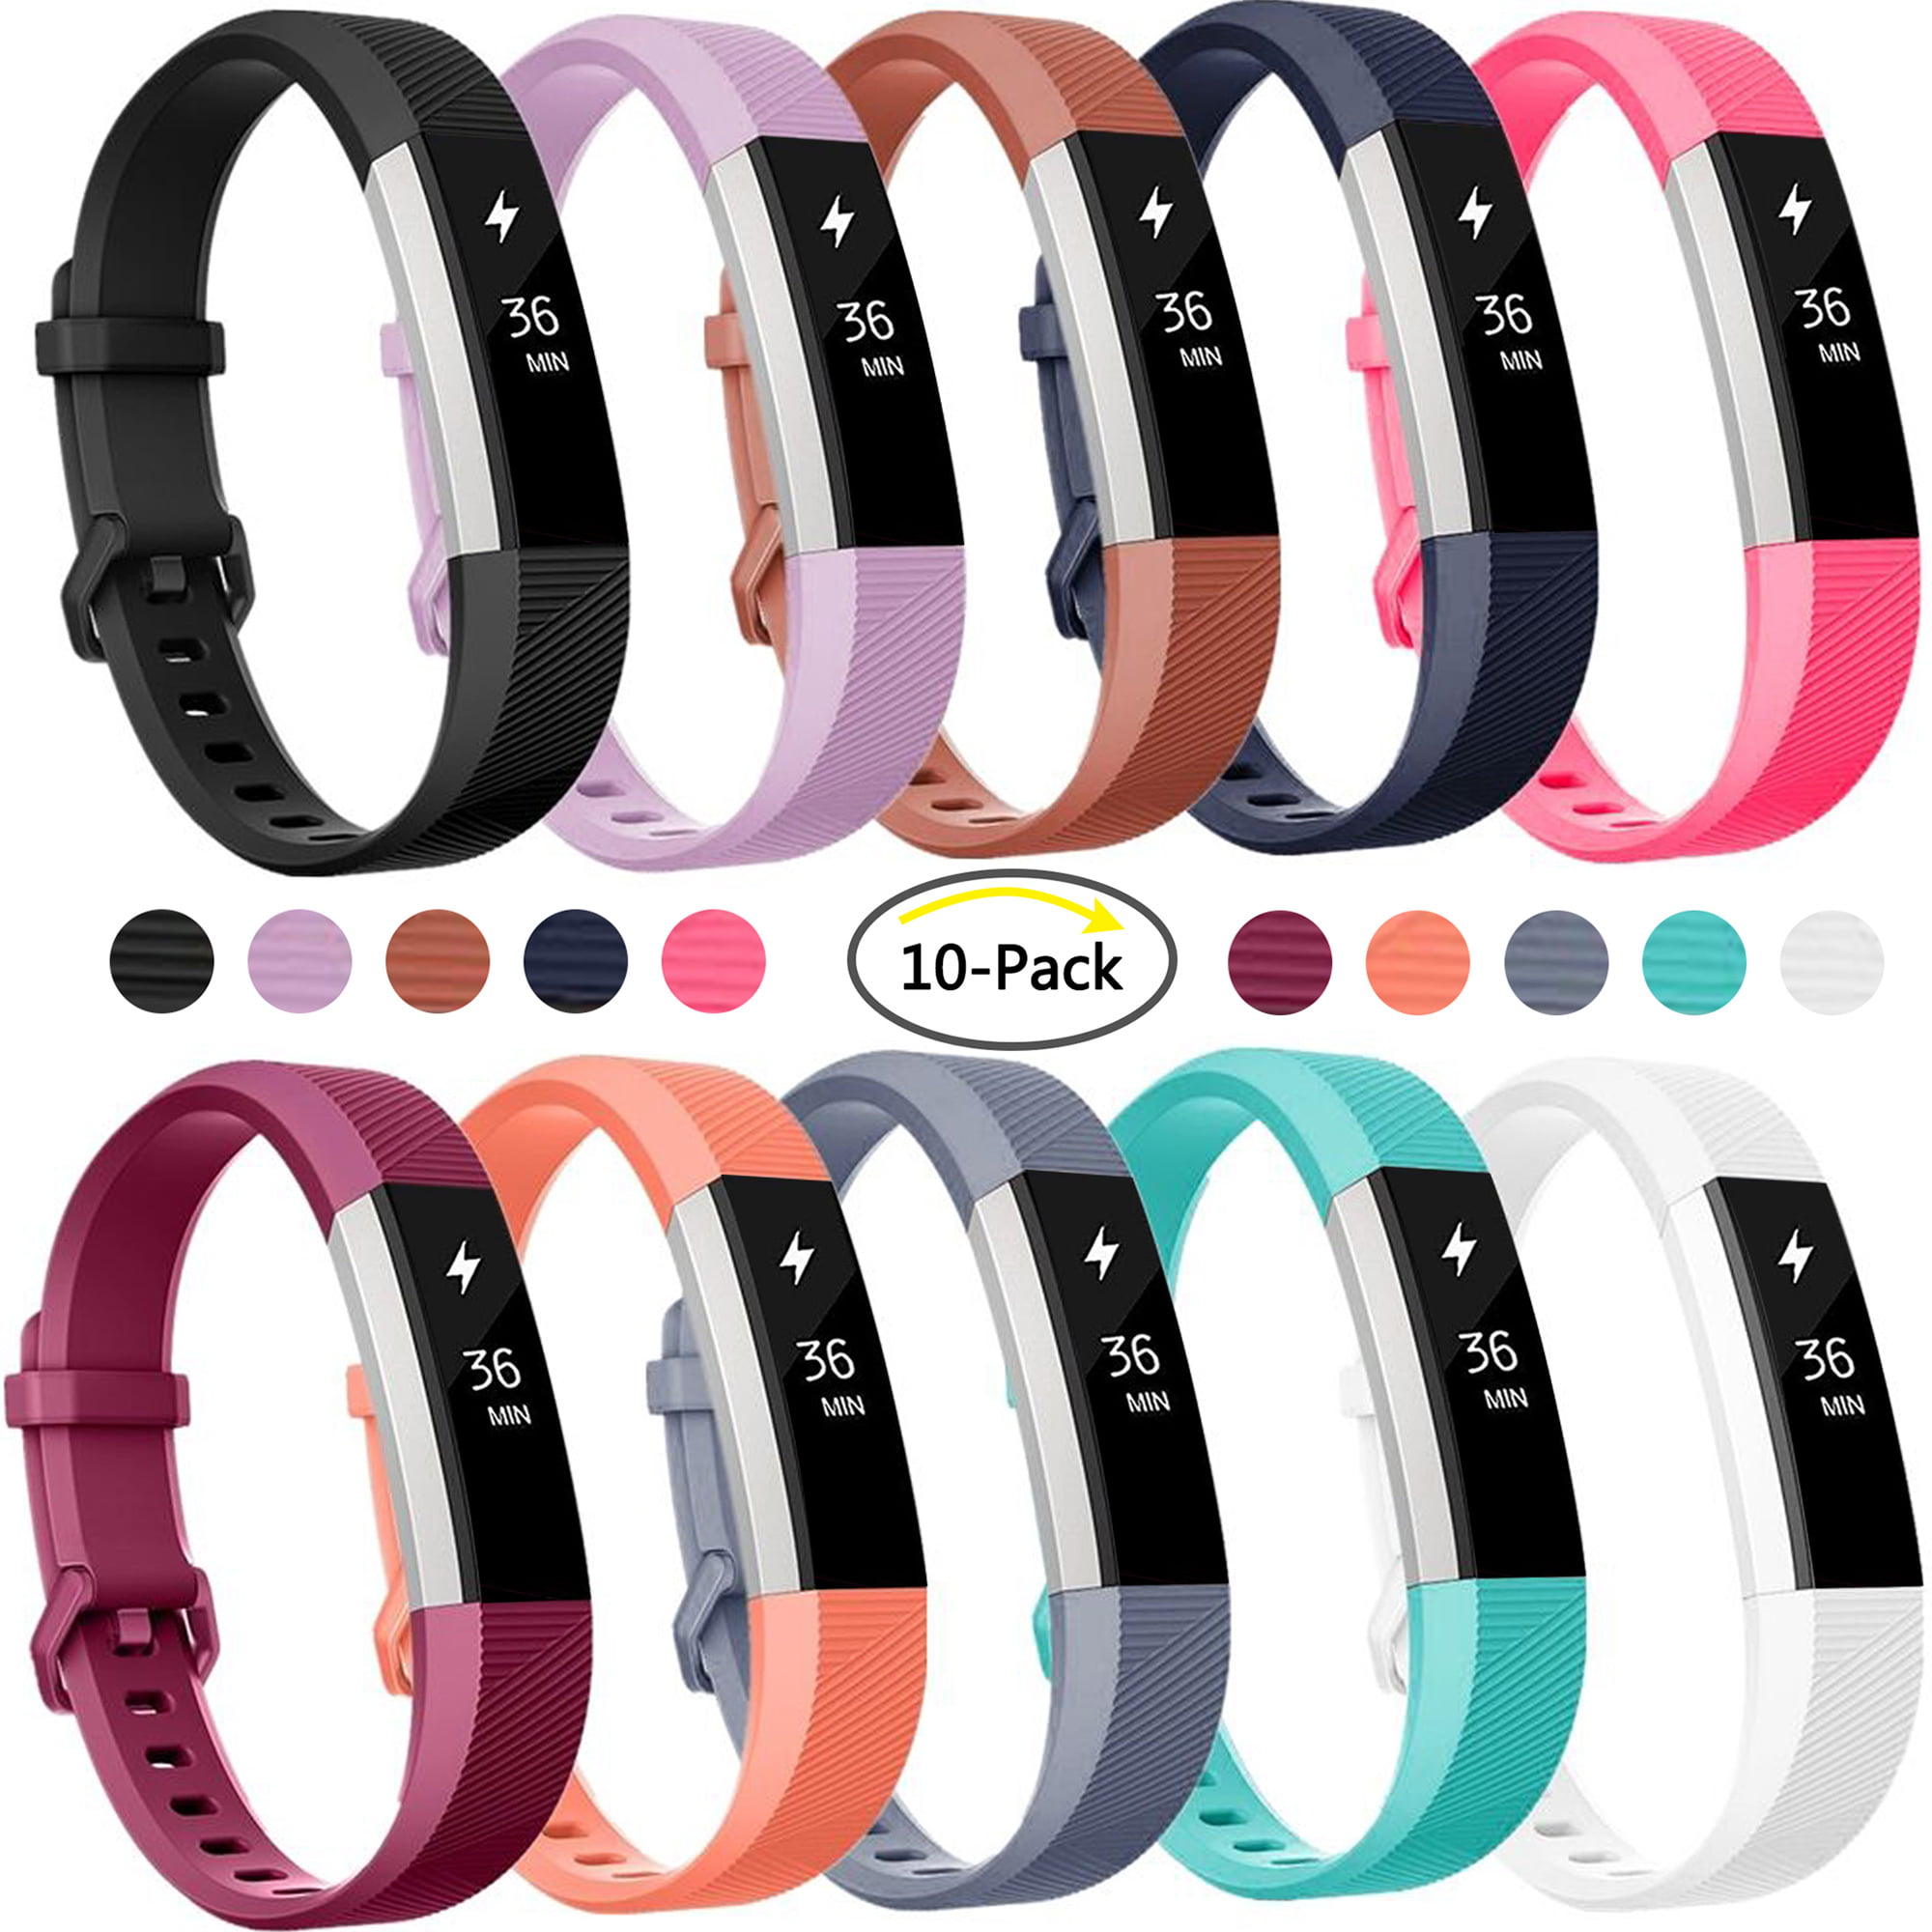 Soft TPU Full Cover Screen protector Clear Slim Case For Fitbit Alta/Alta HR/Ace 